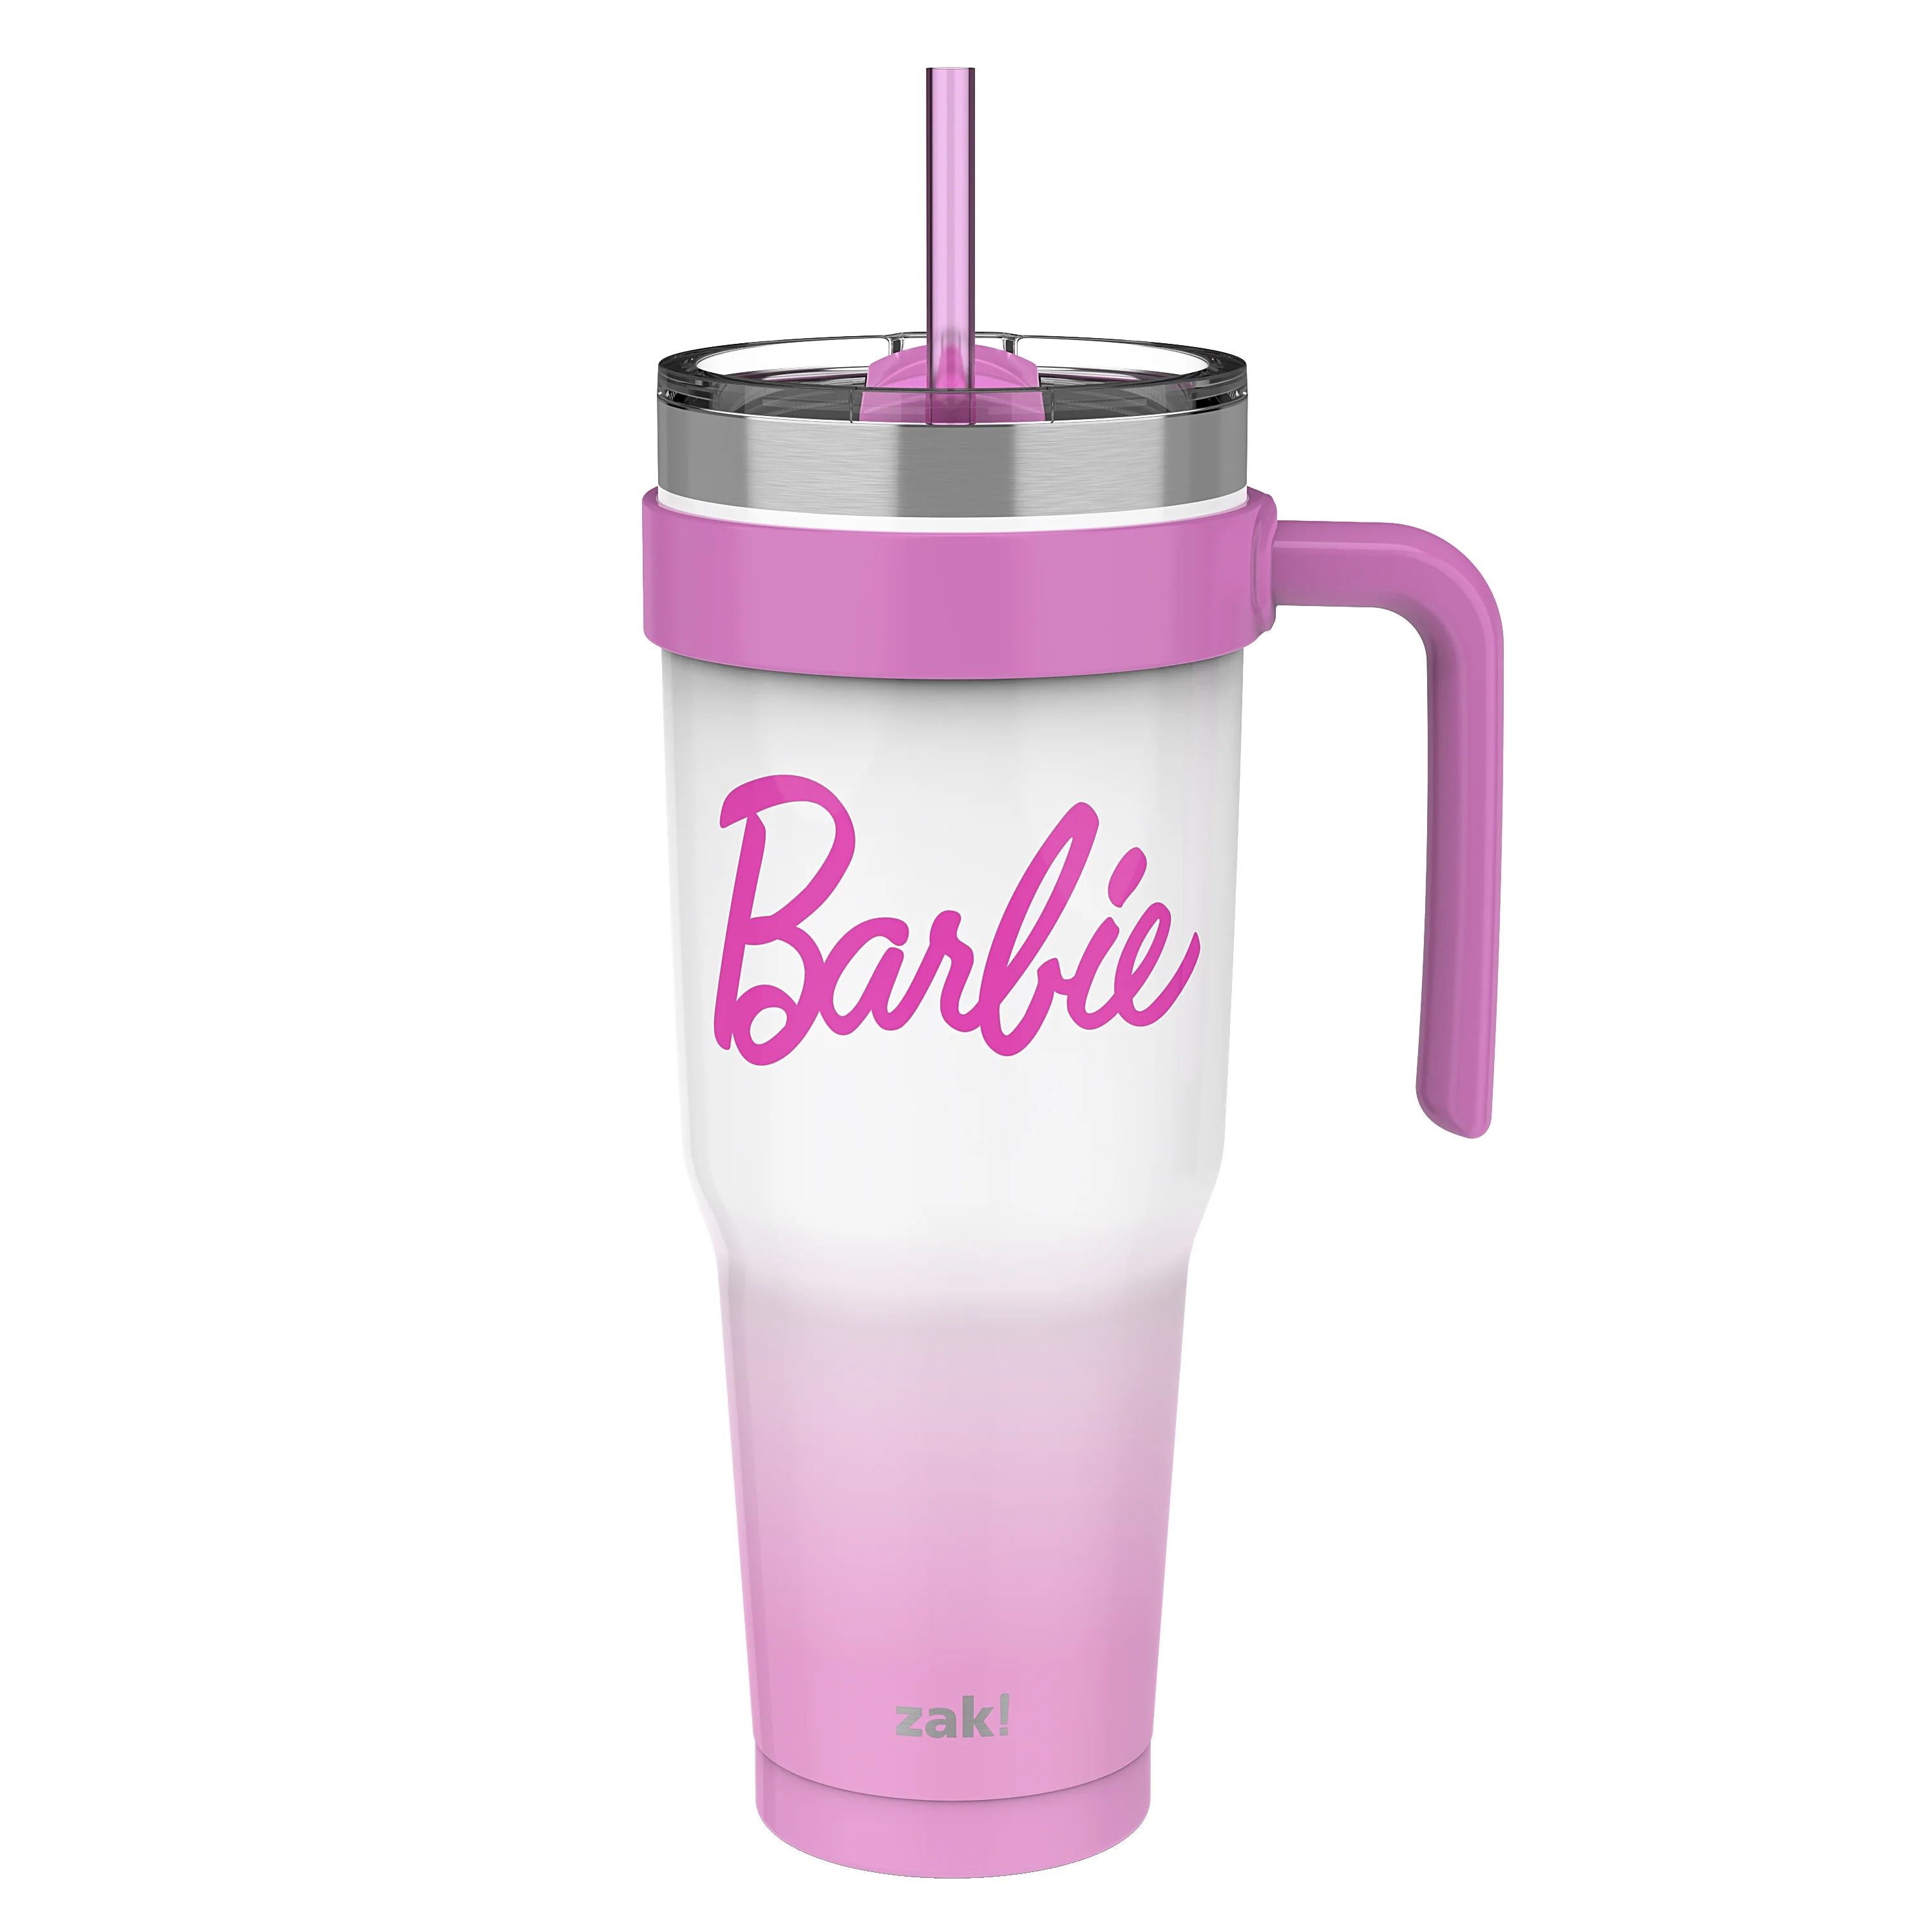 Barbie 40oz Double Wall Stainless Steel Waverly Tumbler - Pink Ombre | Walmart (US)